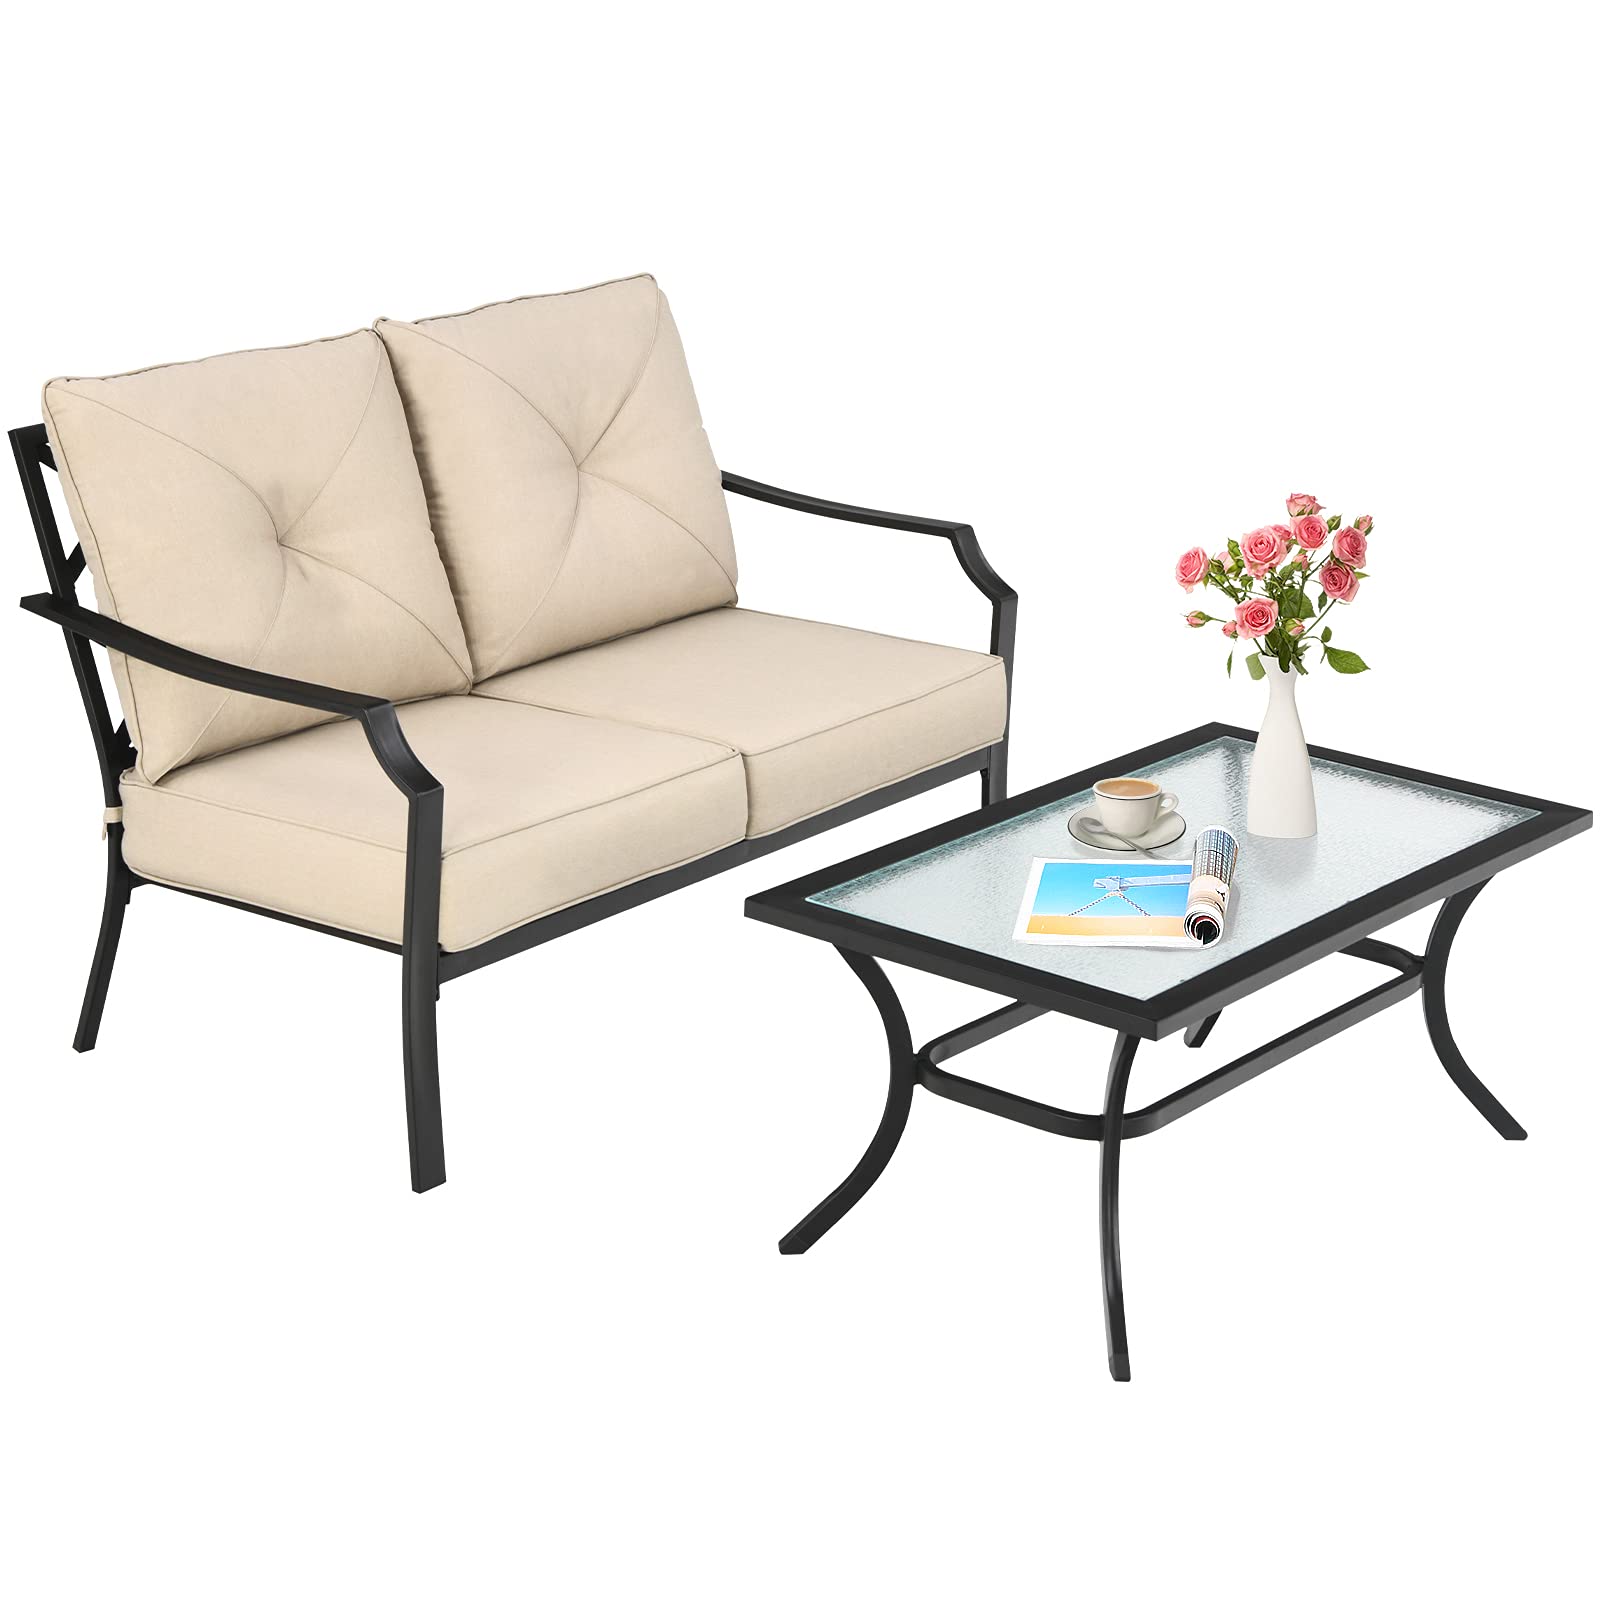 Giantex 2 Pcs Patio Loveseat Set, 2 Seat Bench Sofa with Coffee Table(Beige)